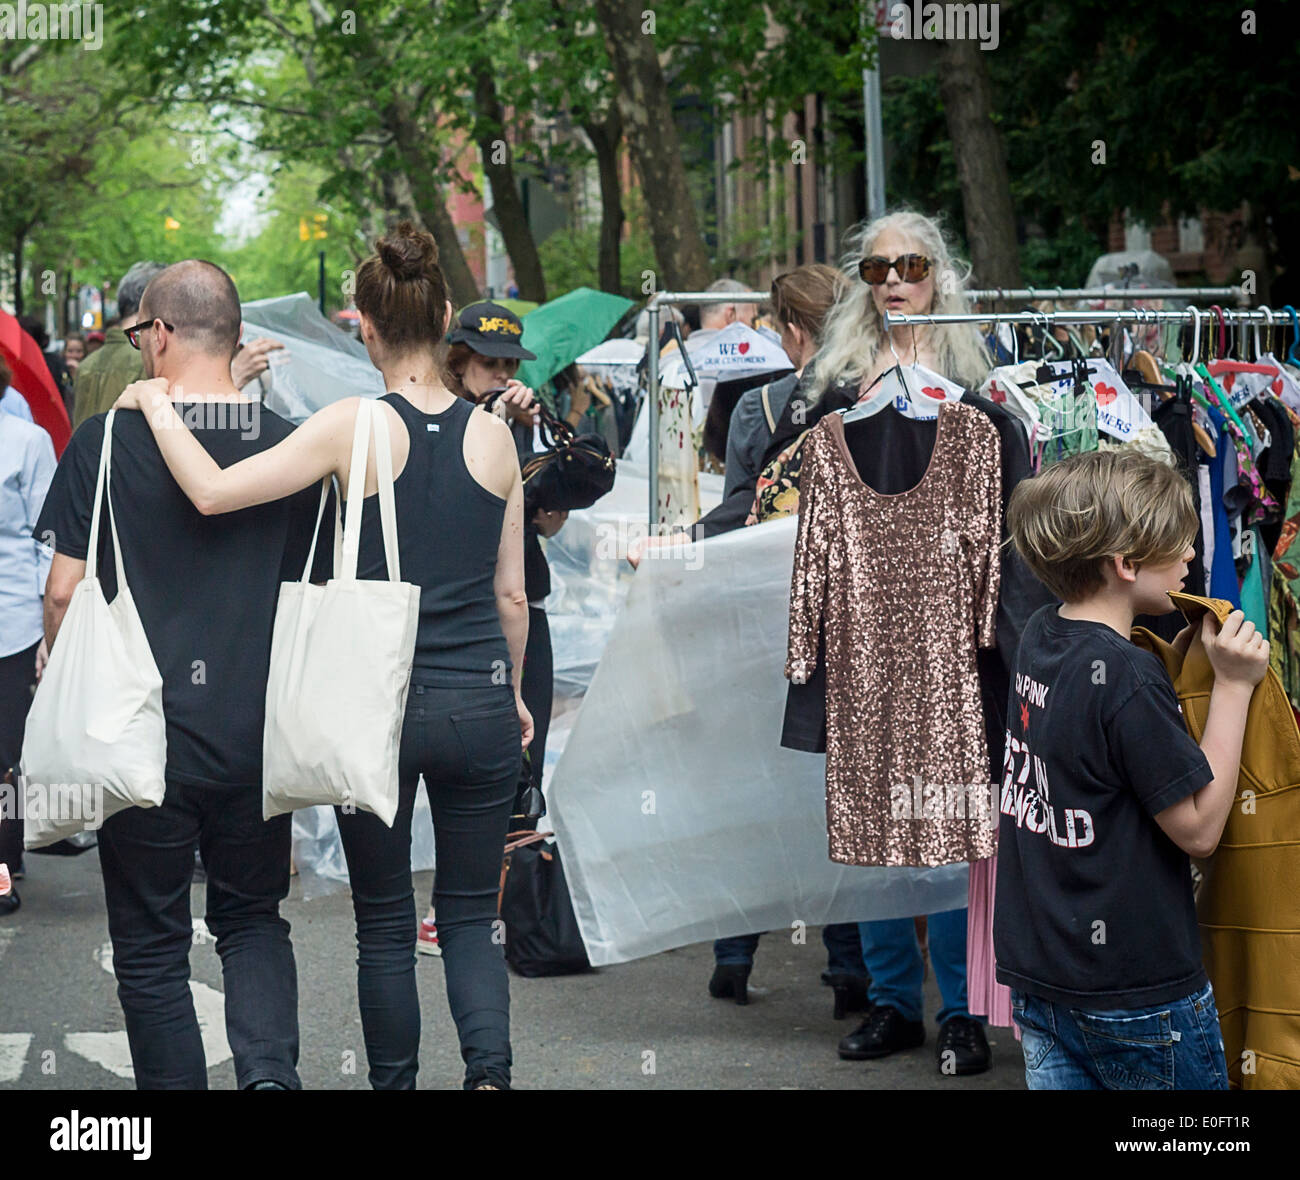 Shoppers search for bargains at a flea market in the New York neighborhood of Greenwich Village Stock Photo